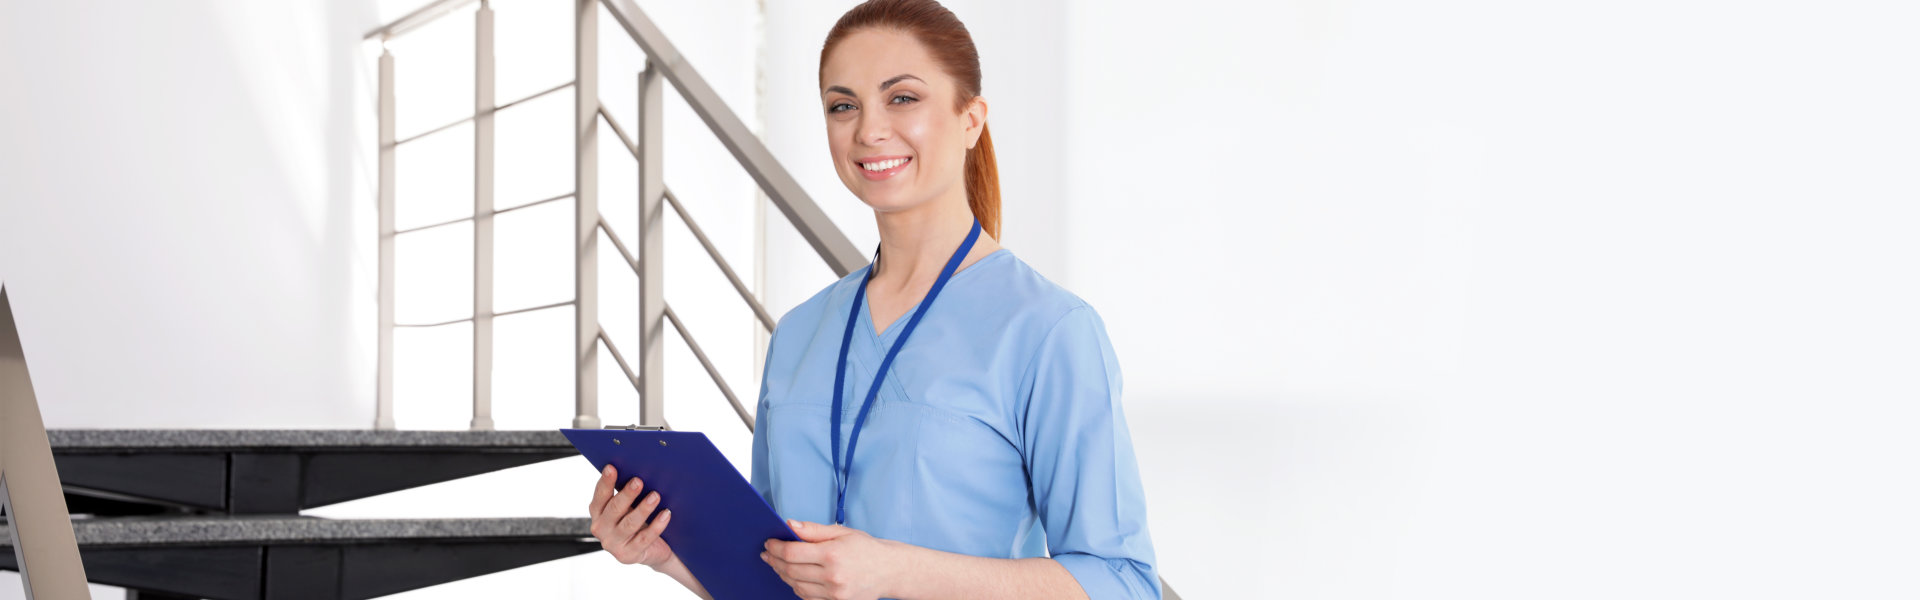 nurse holding folder and looking at the camera